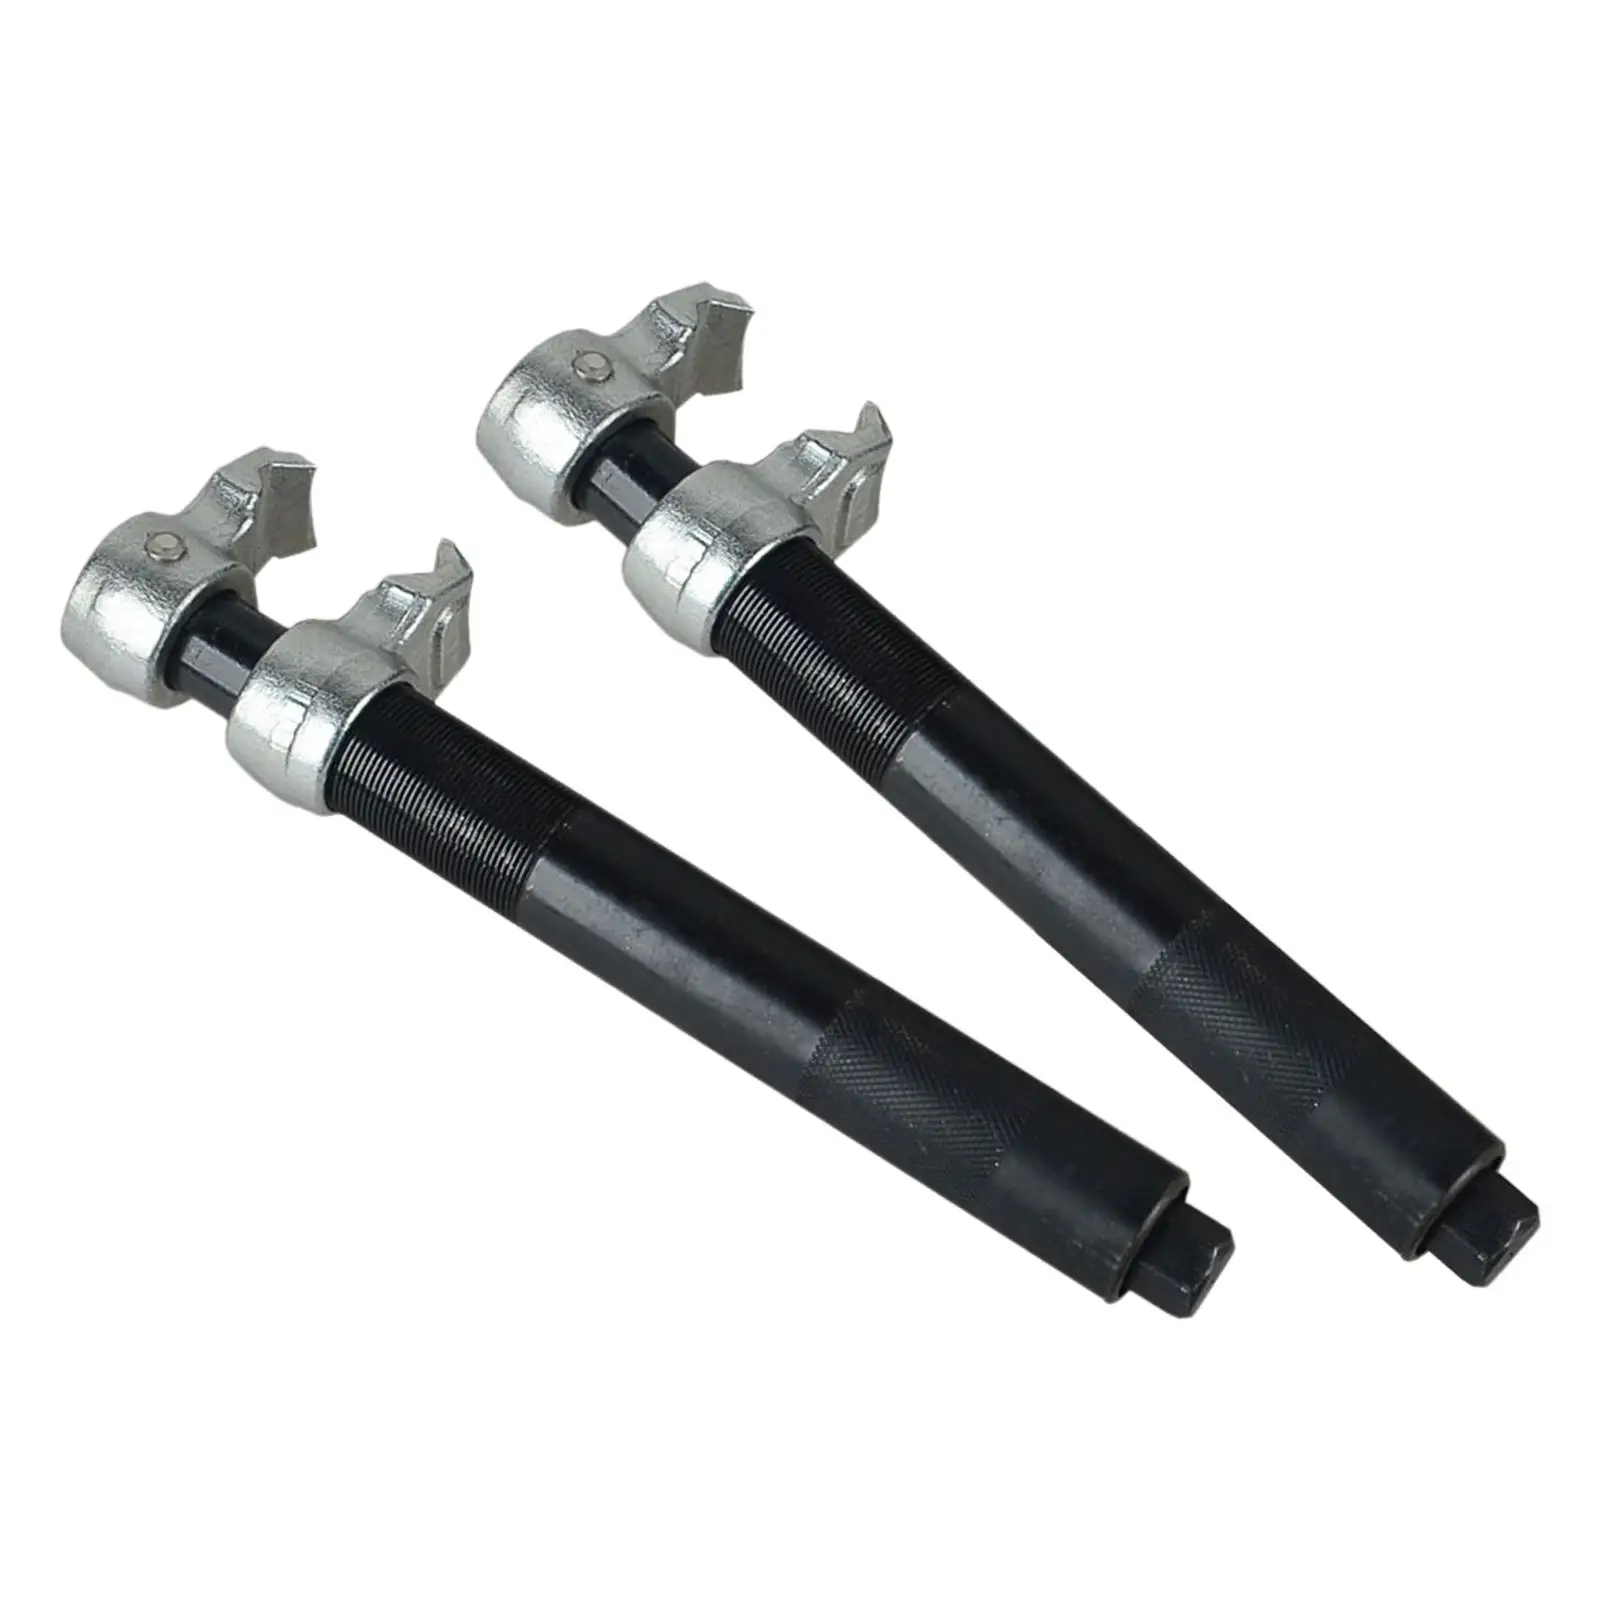 Compressor Adjustable Premium with 2 Steel Jaw Claws Adjuster Tool Spreads or Compresses Lift or Lower Spring Spacer